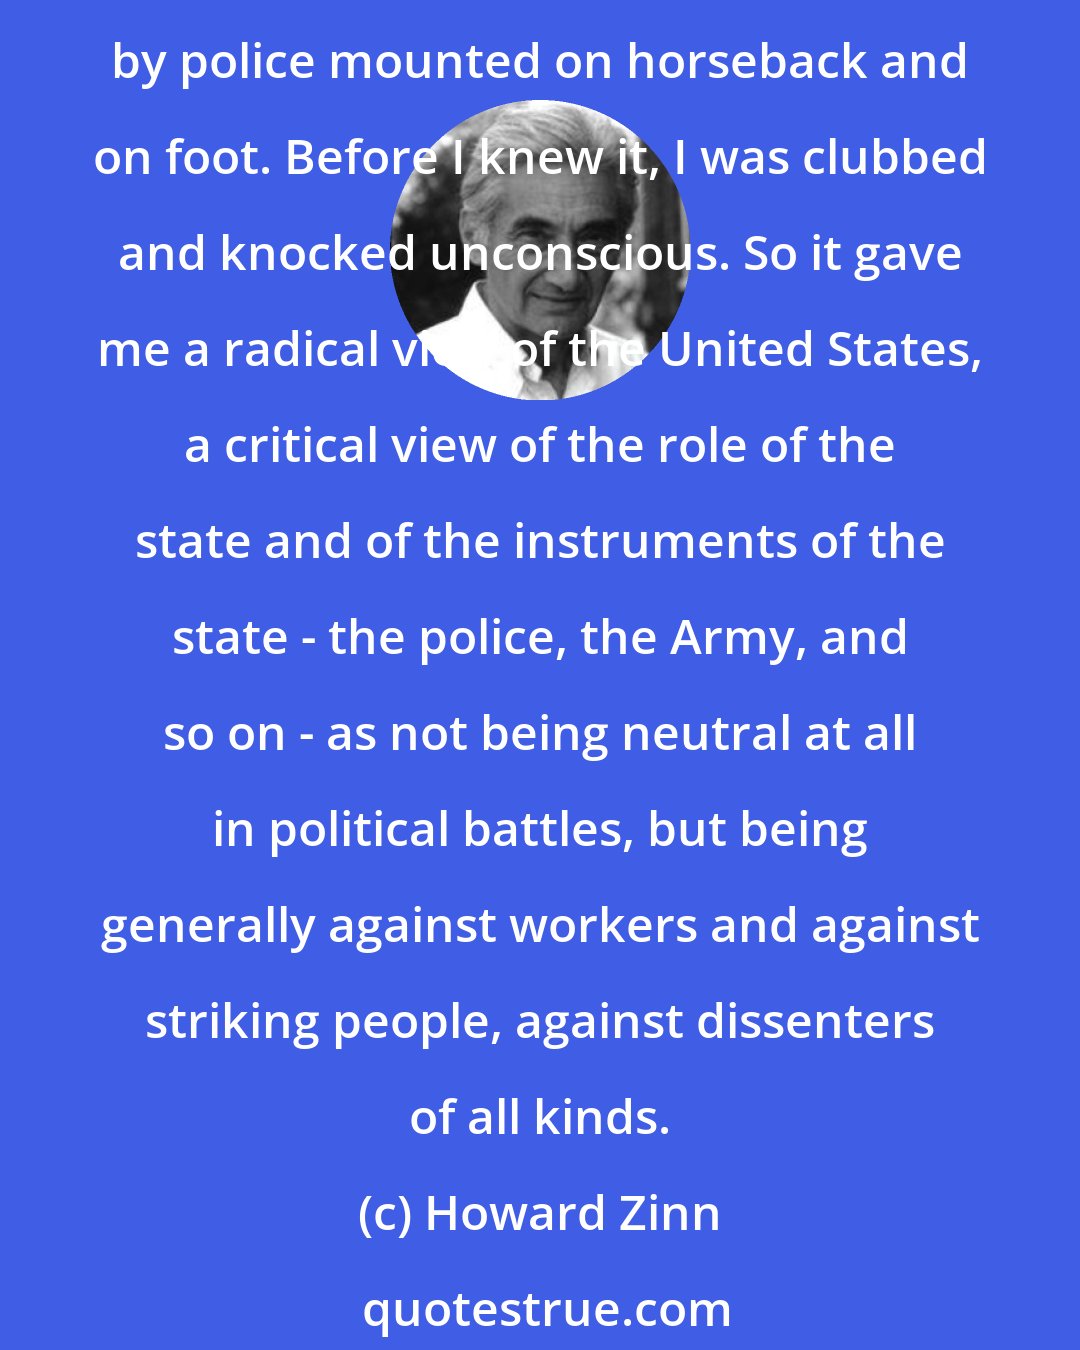 Howard Zinn: I was just a seventeen-year-old kid, going to Times Square to participate in this left-wing demonstration. The signs were for peace and justice and so on. But then I was attacked by police mounted on horseback and on foot. Before I knew it, I was clubbed and knocked unconscious. So it gave me a radical view of the United States, a critical view of the role of the state and of the instruments of the state - the police, the Army, and so on - as not being neutral at all in political battles, but being generally against workers and against striking people, against dissenters of all kinds.